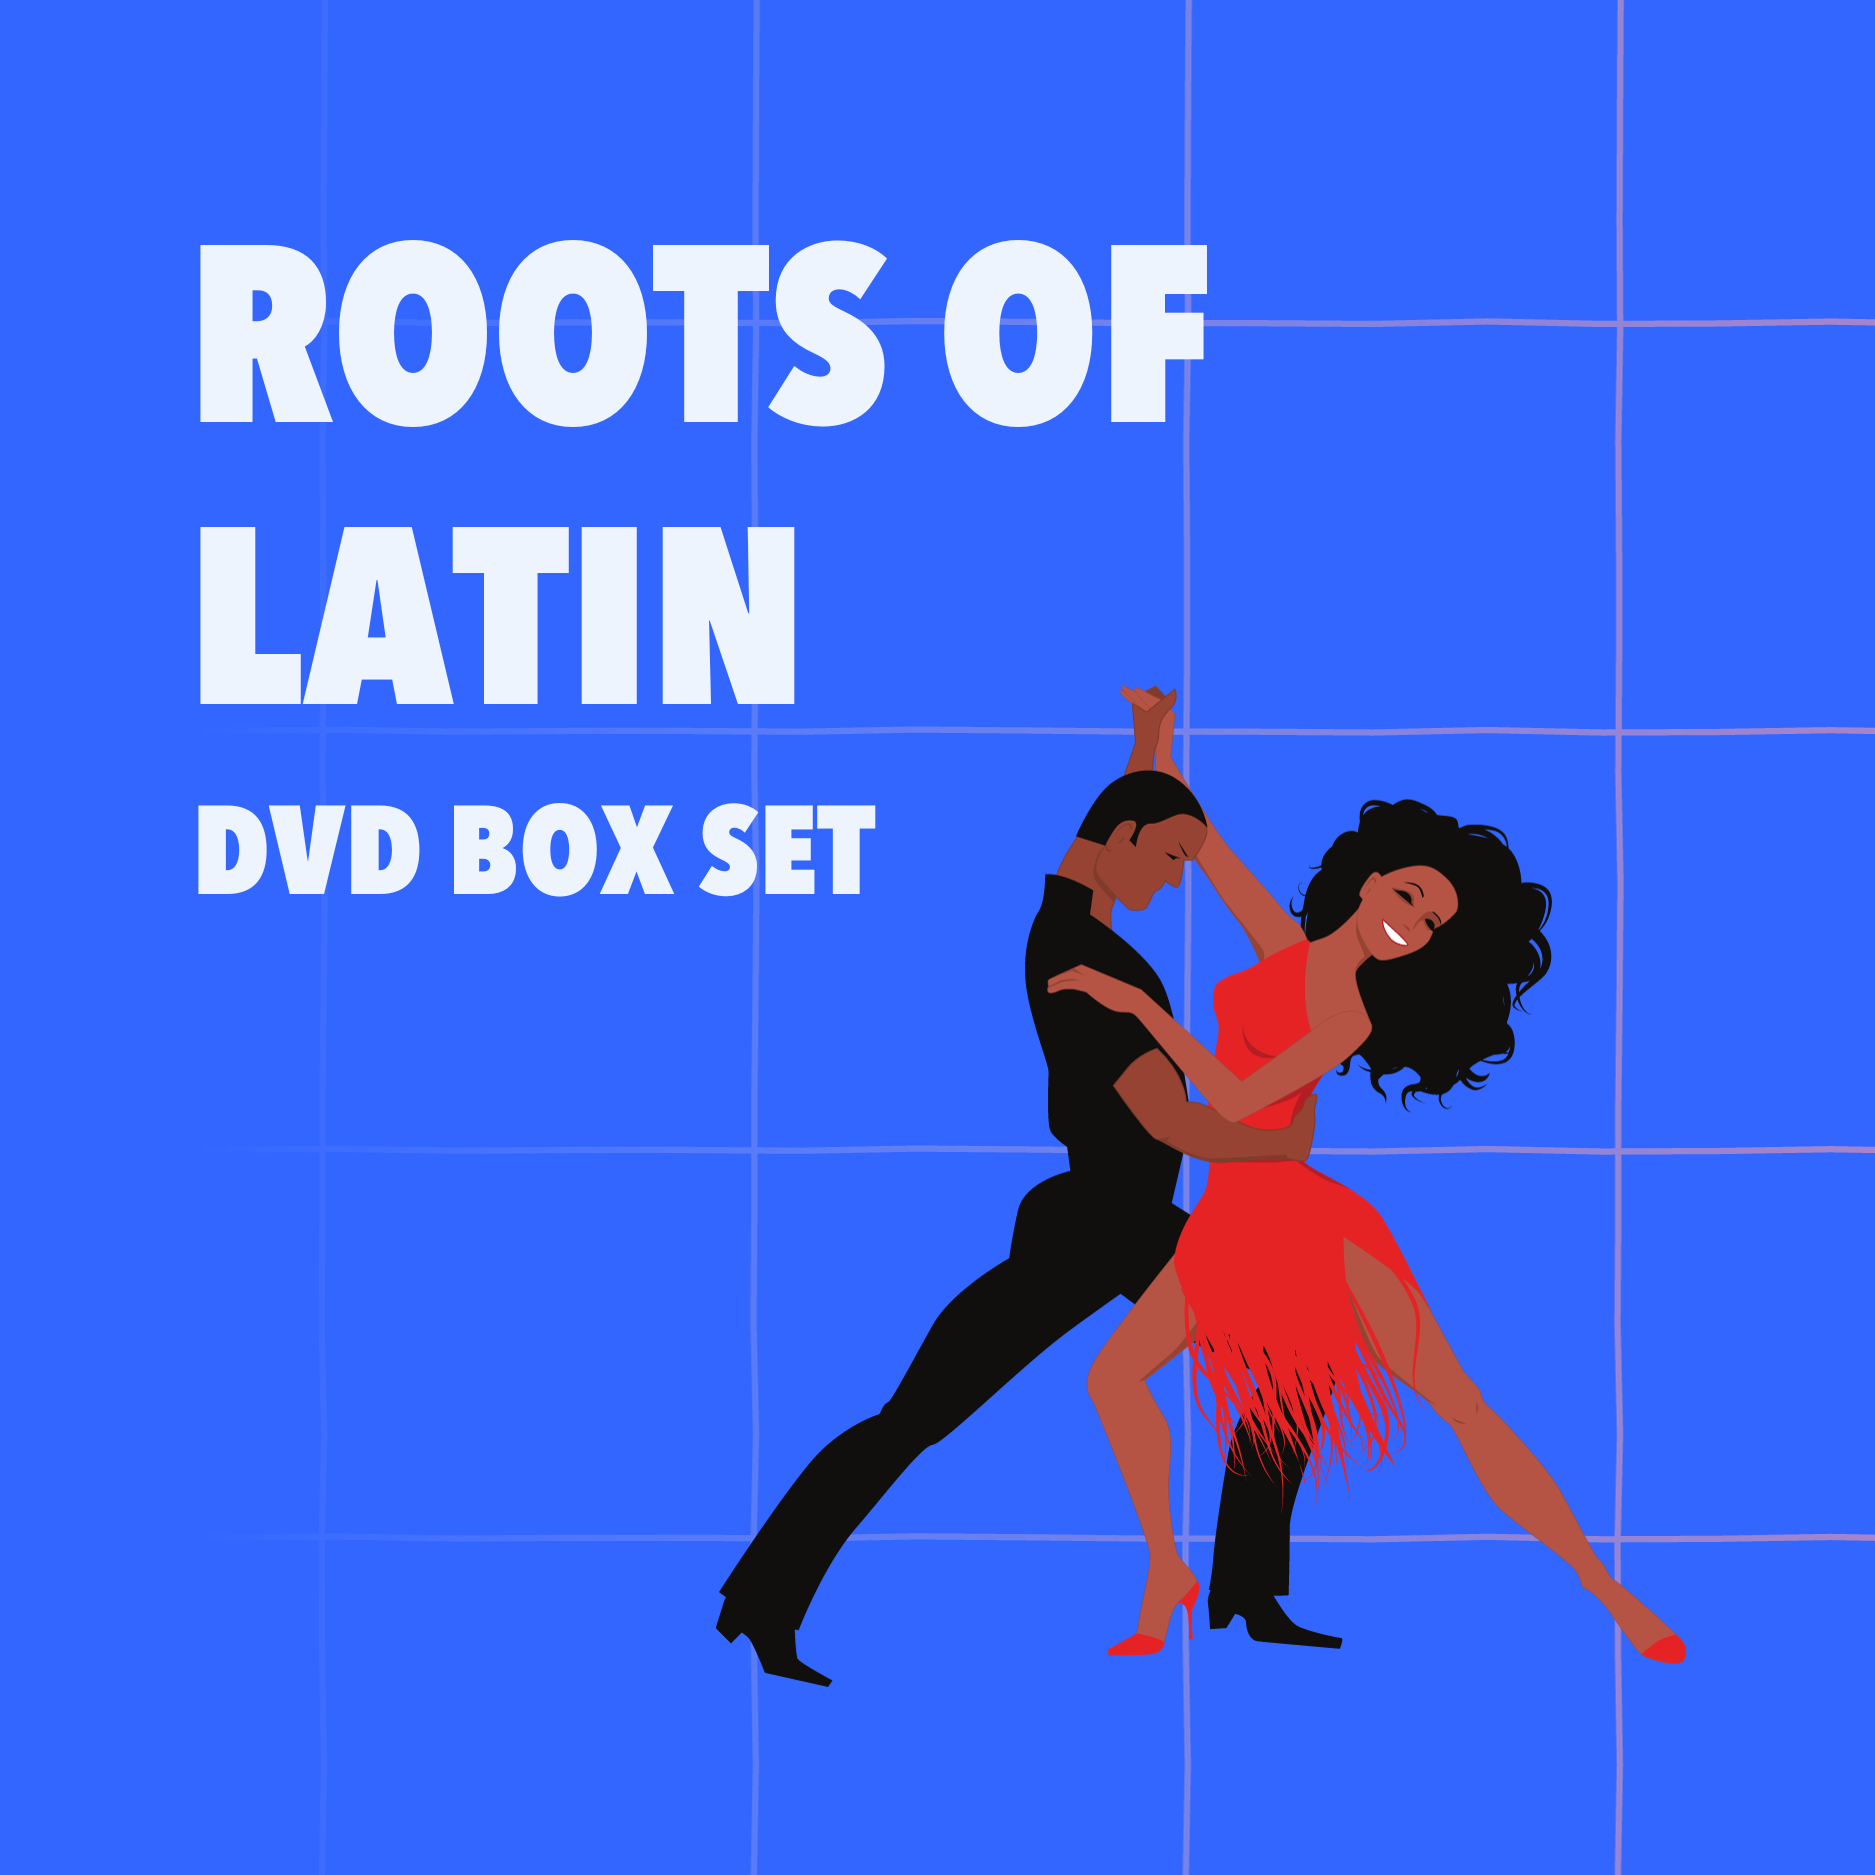 Roots of Latin DVD Box Set. Includes 24 DVDs.